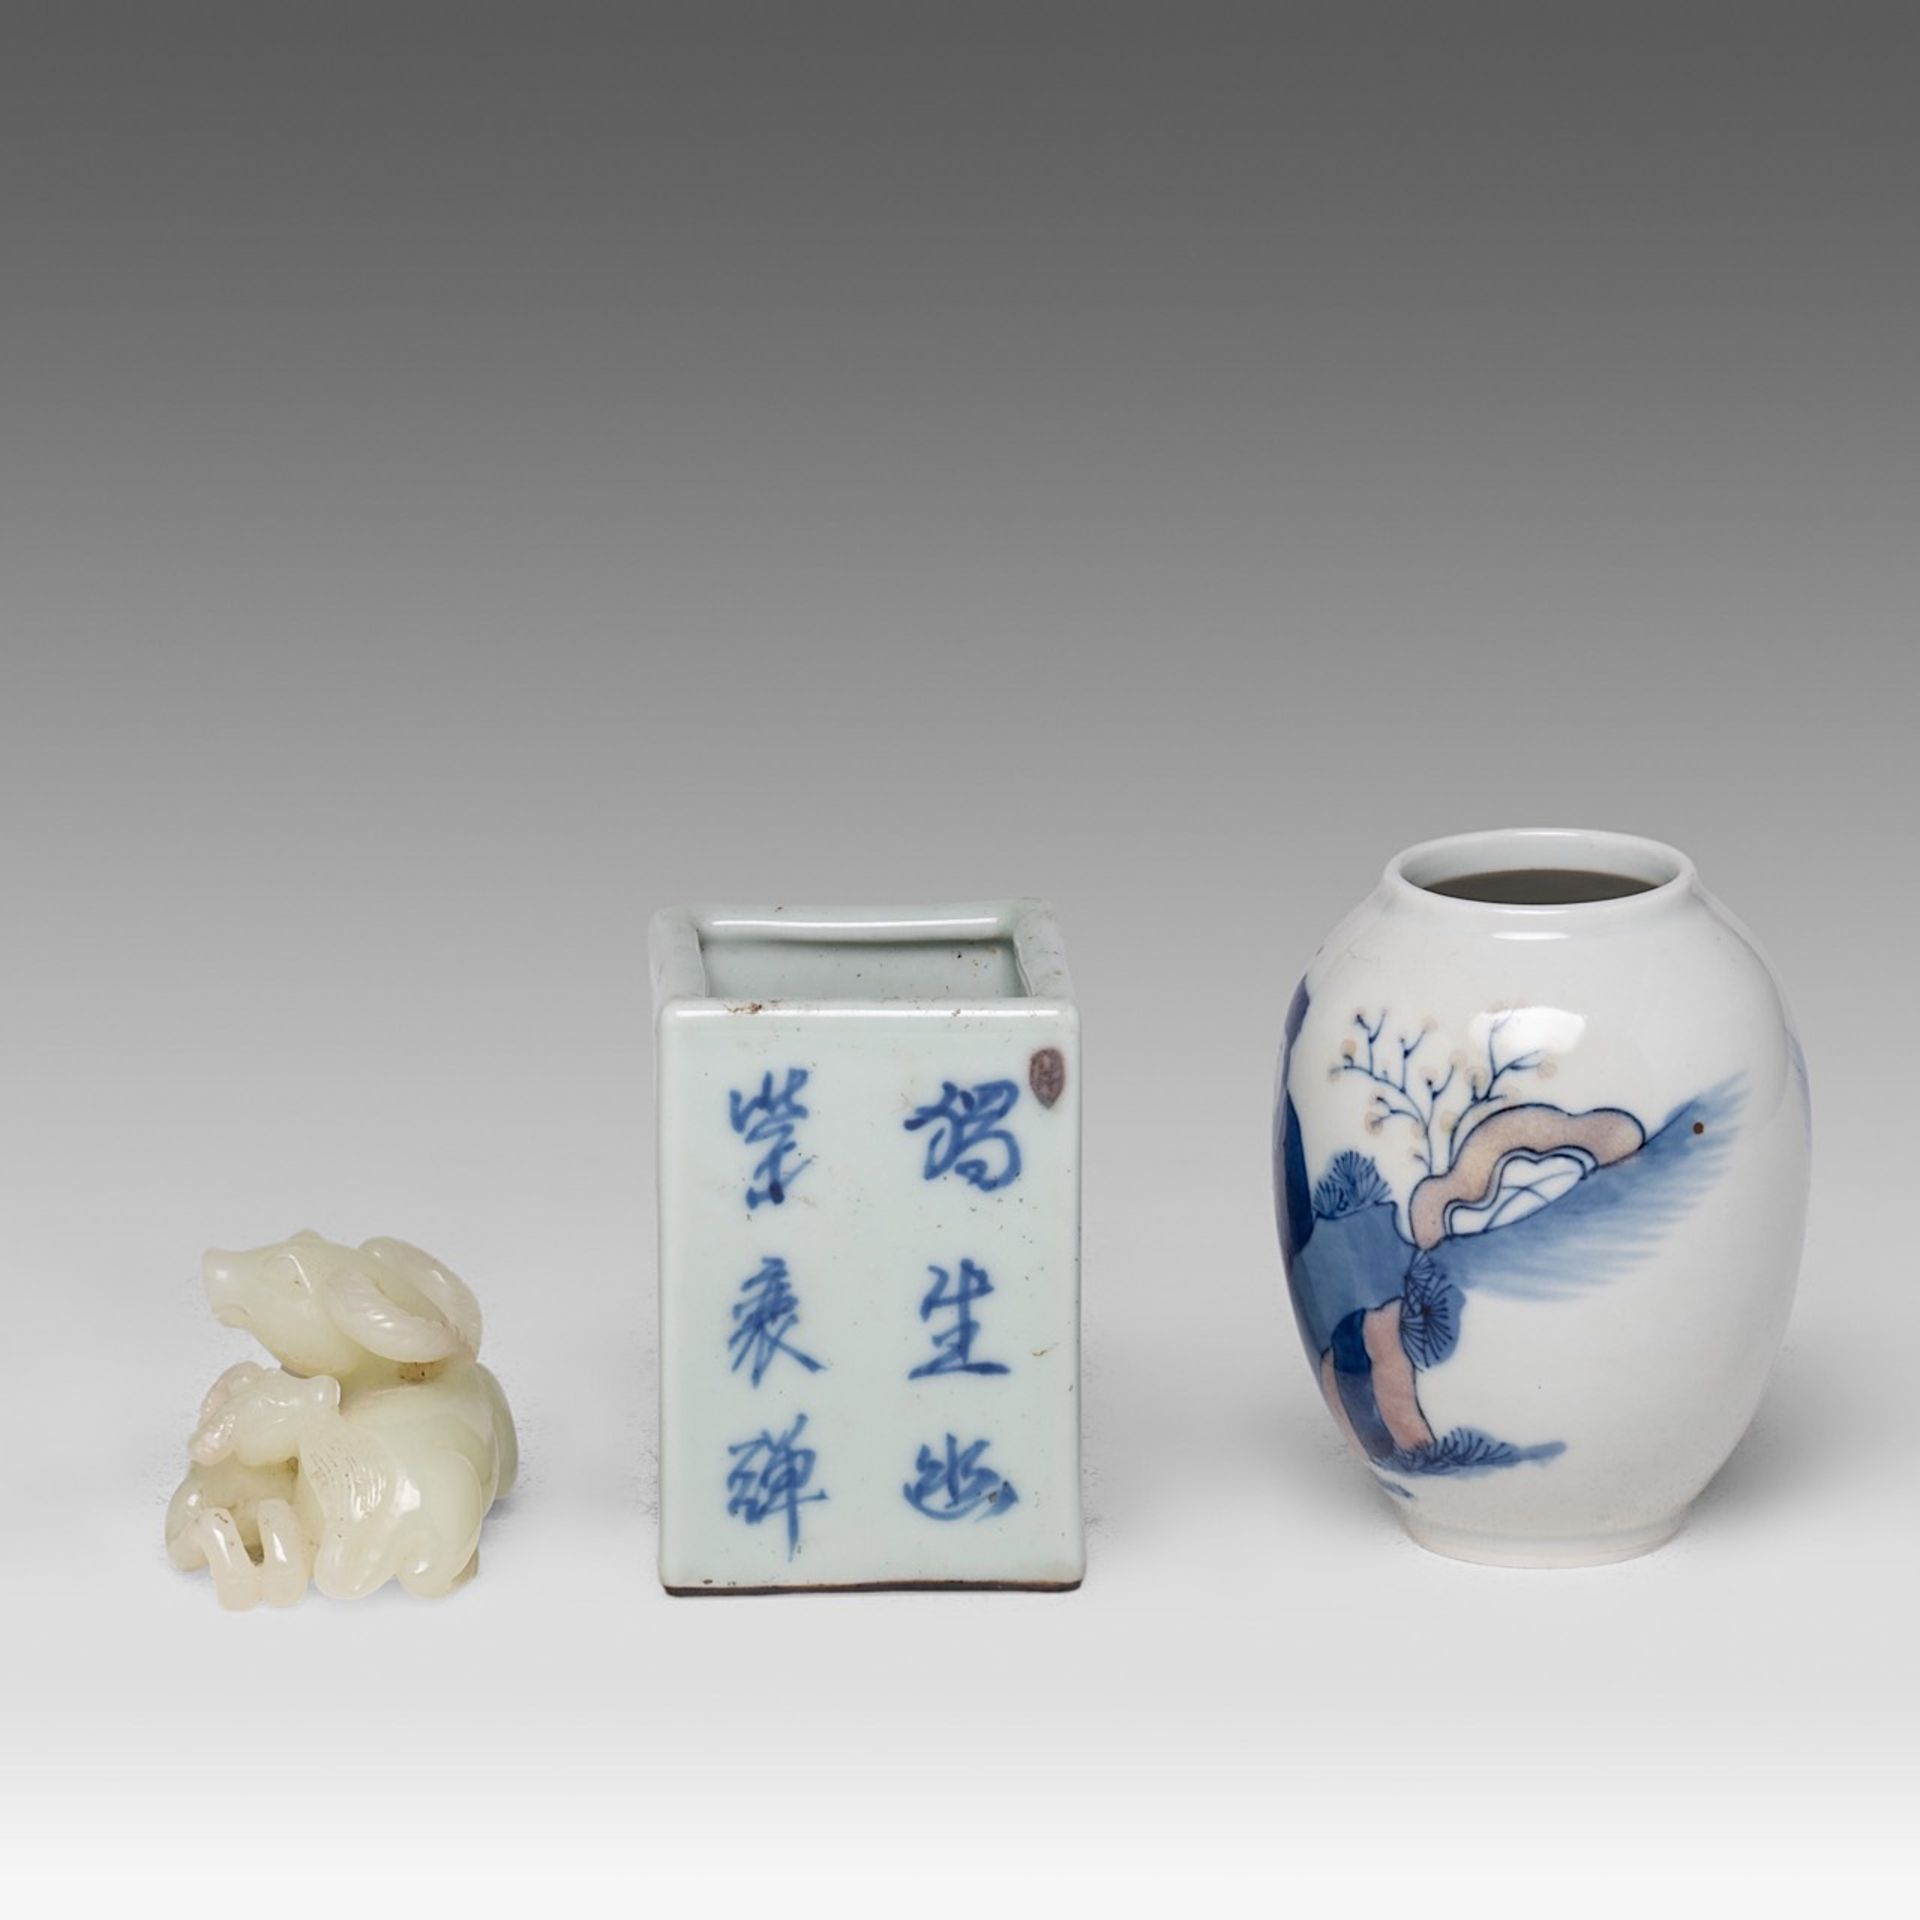 A collection of four Chinese scholar's objects, incl. a brush pot with inscriptions, late 18thC - ad - Bild 3 aus 29